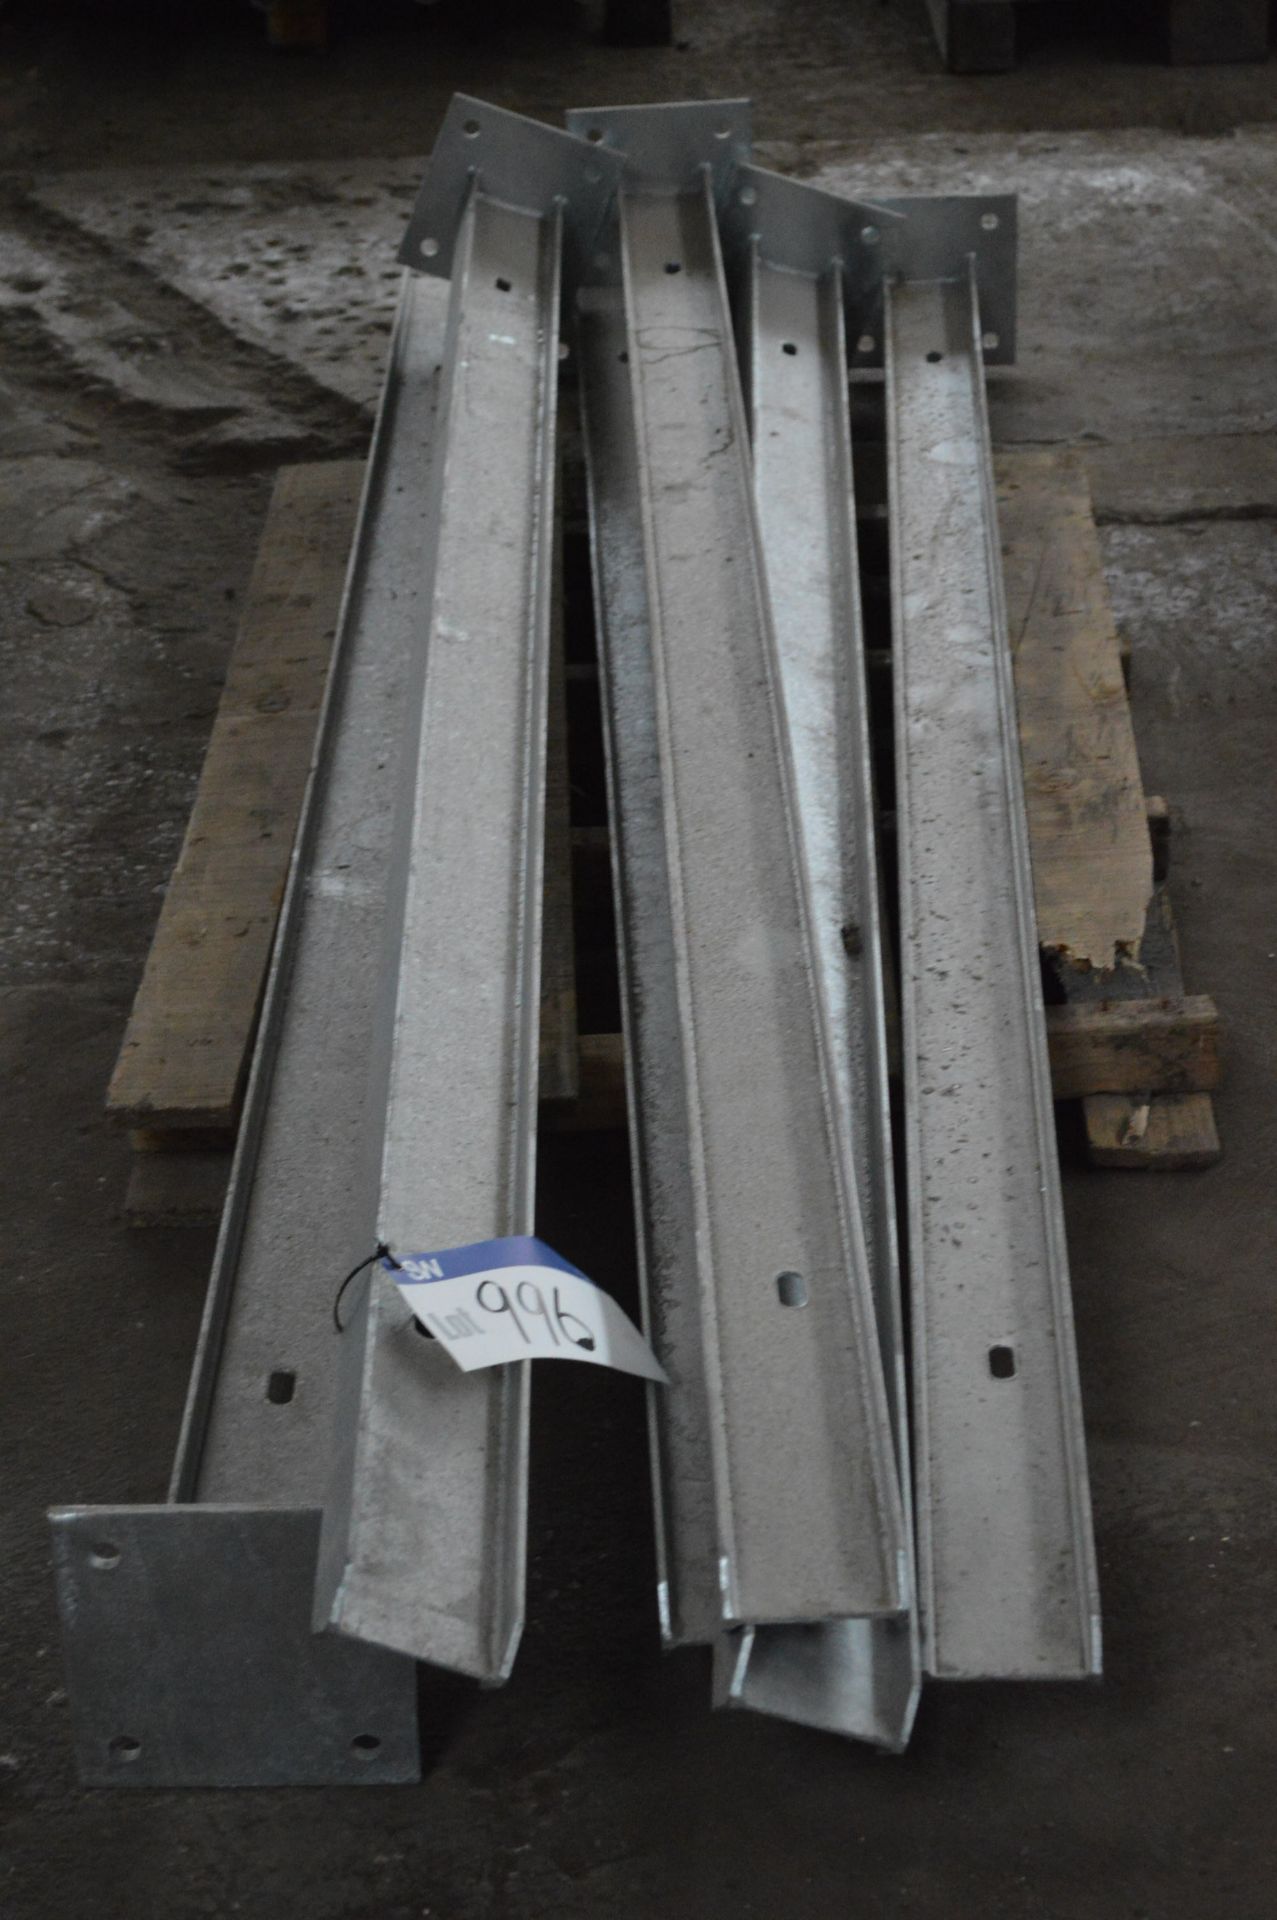 Palisade Fencing Components, as set out on three pallets